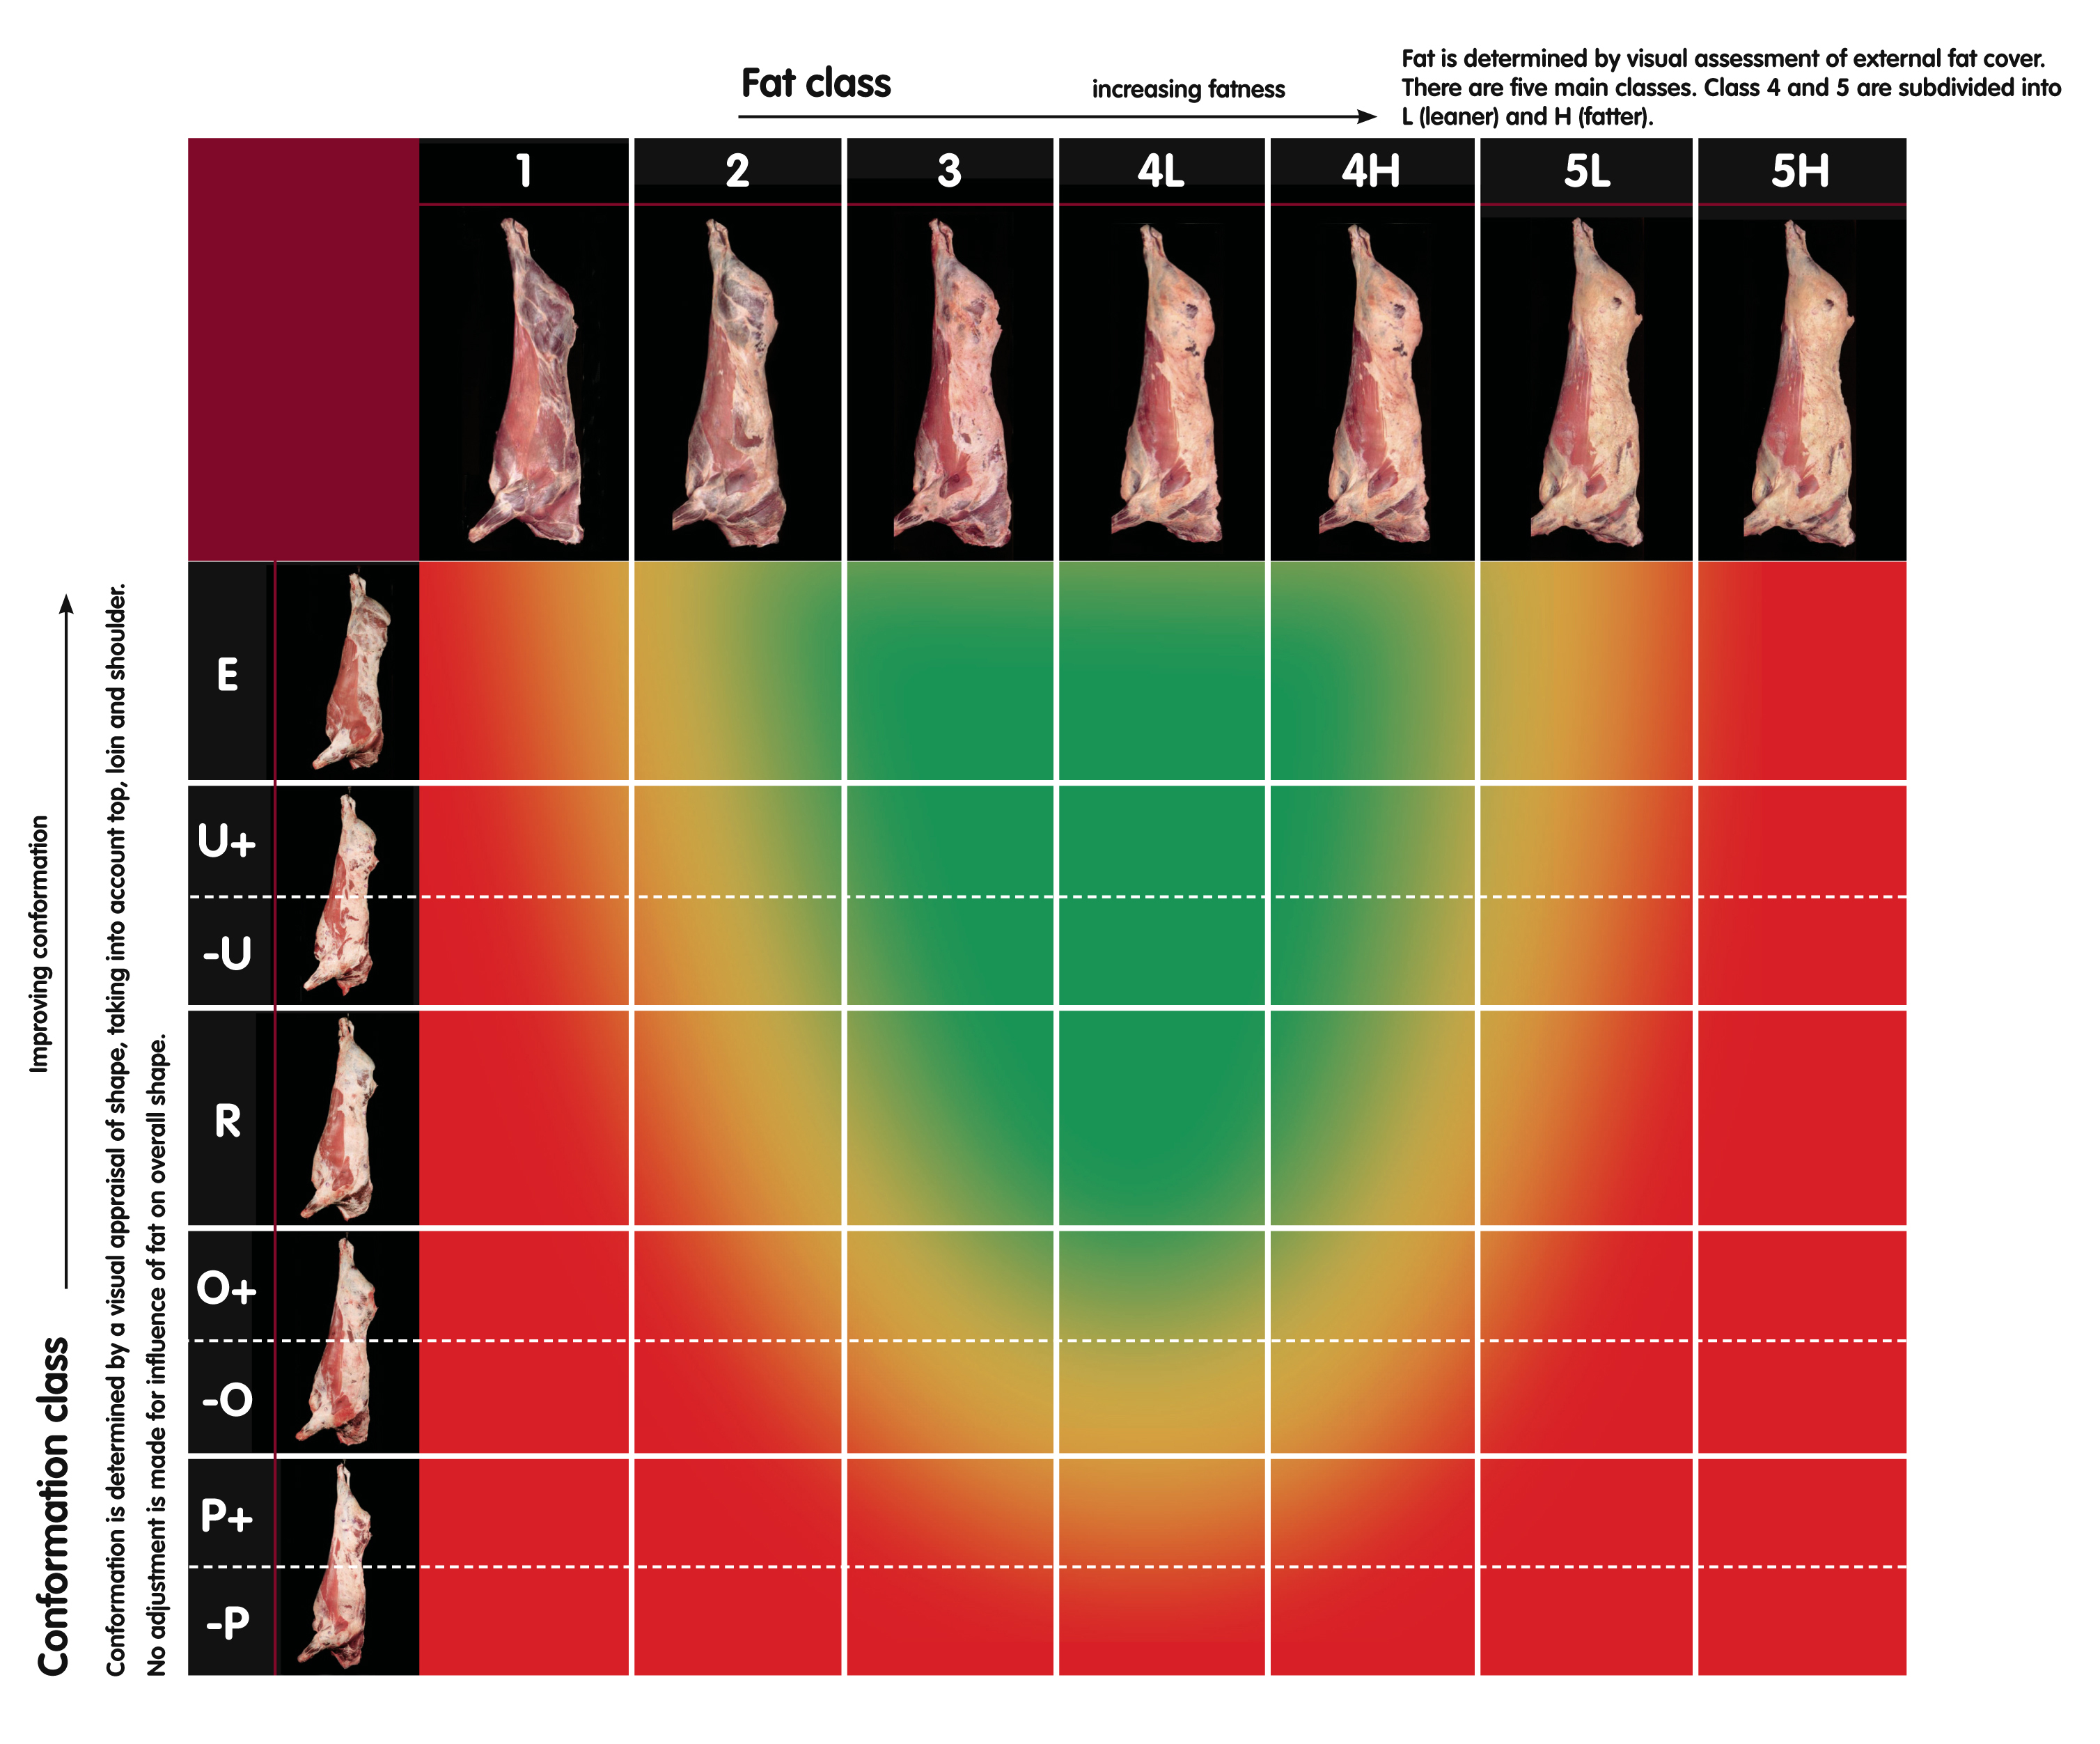 Beef carcase classification grid using EUROP for conformation and a numeric assessment for fatness (classes 1–5). 